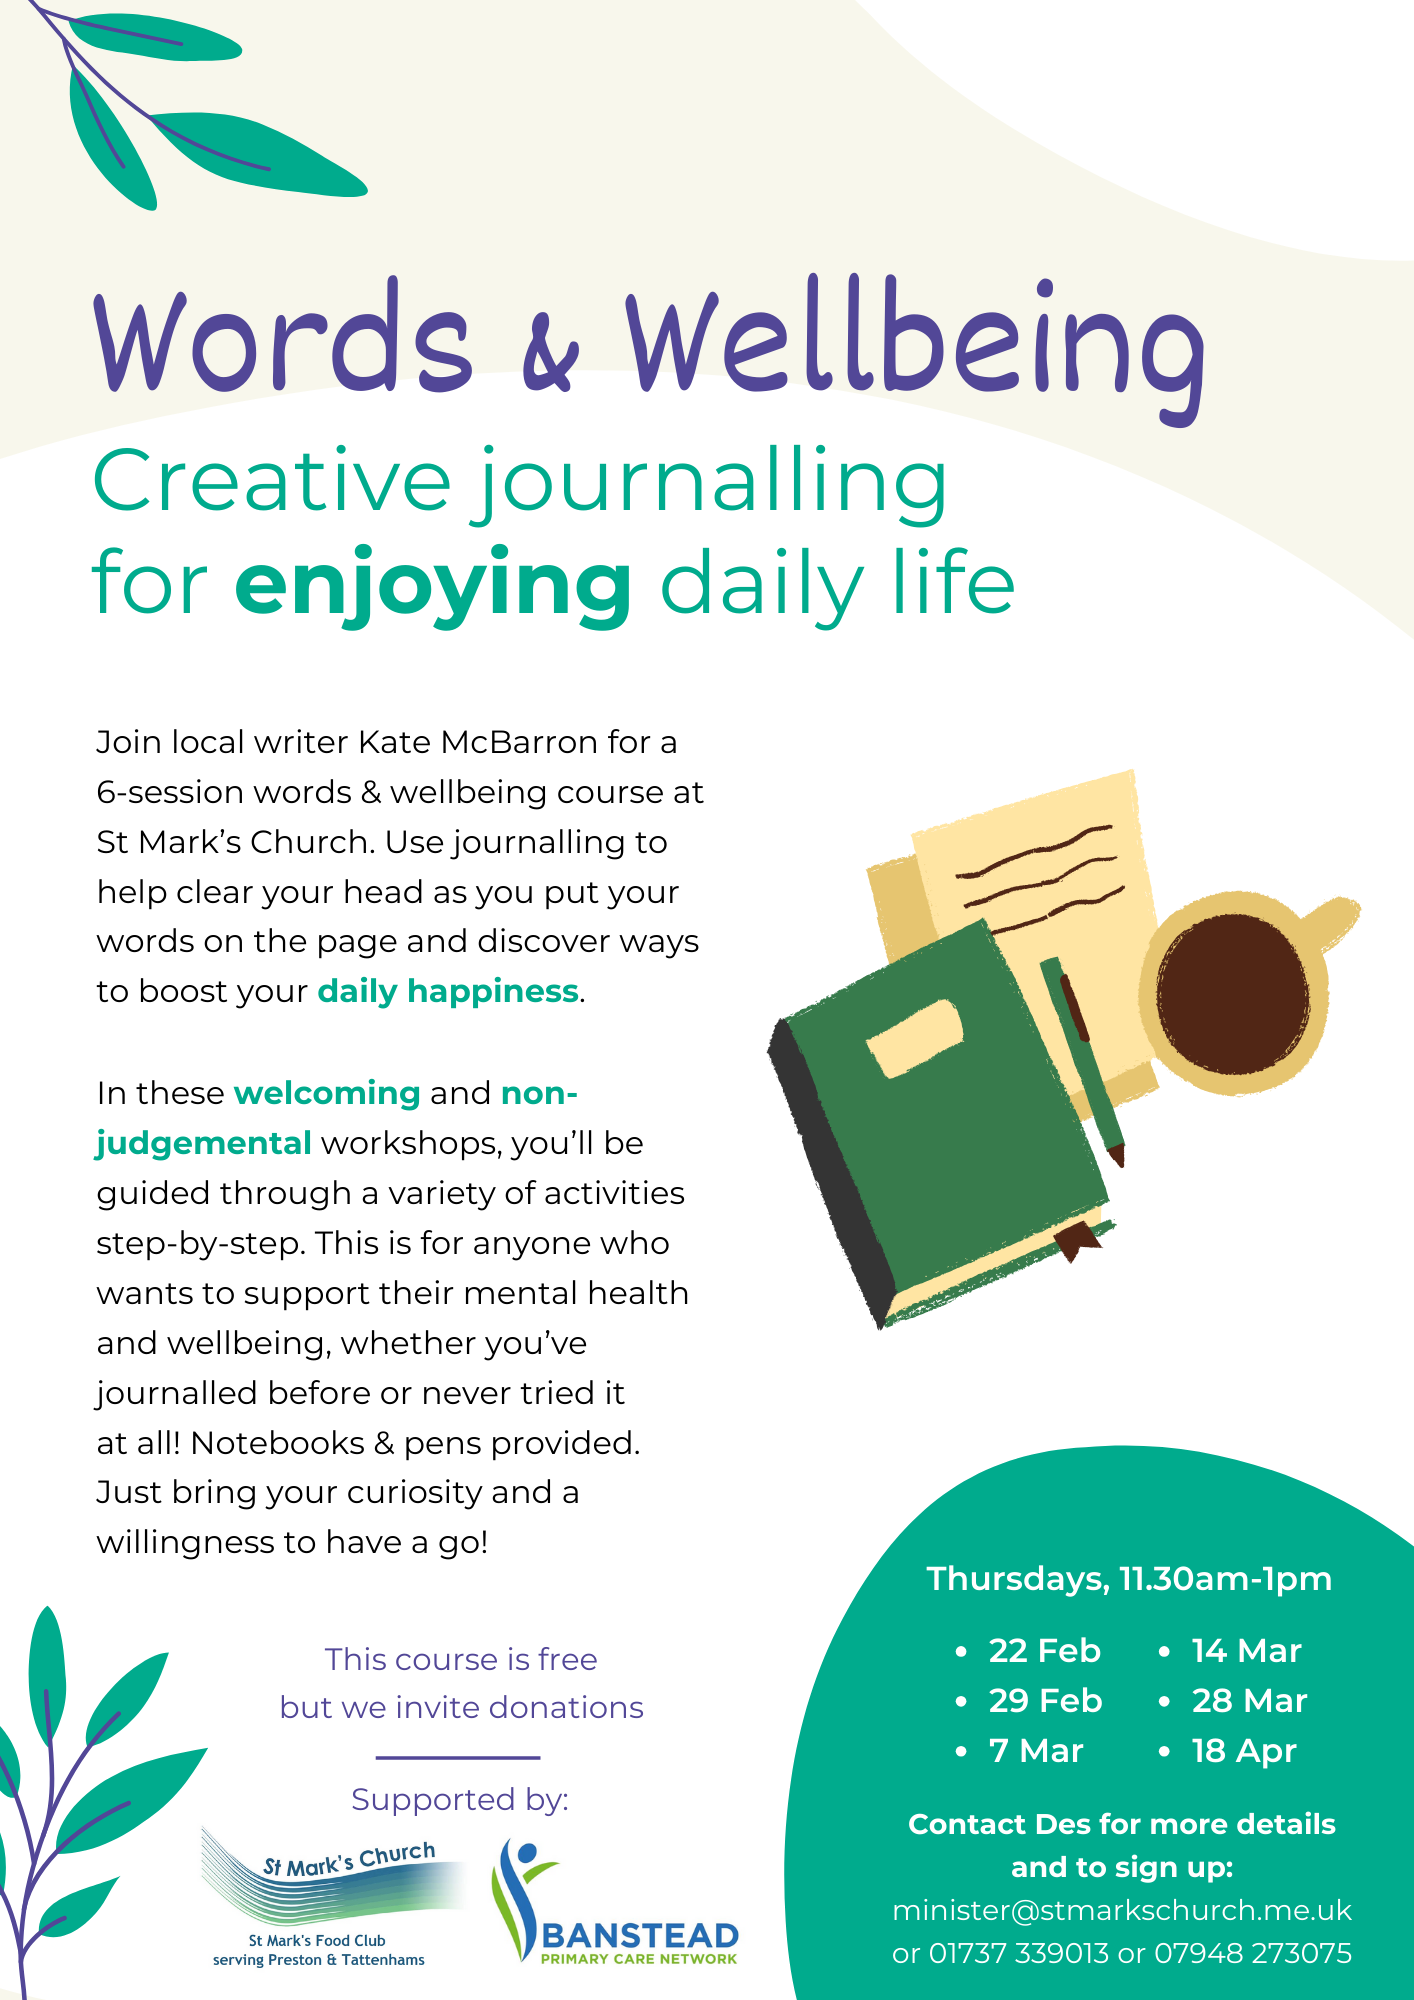 Words and Wellbeing – Creative journalling for enjoying daily life